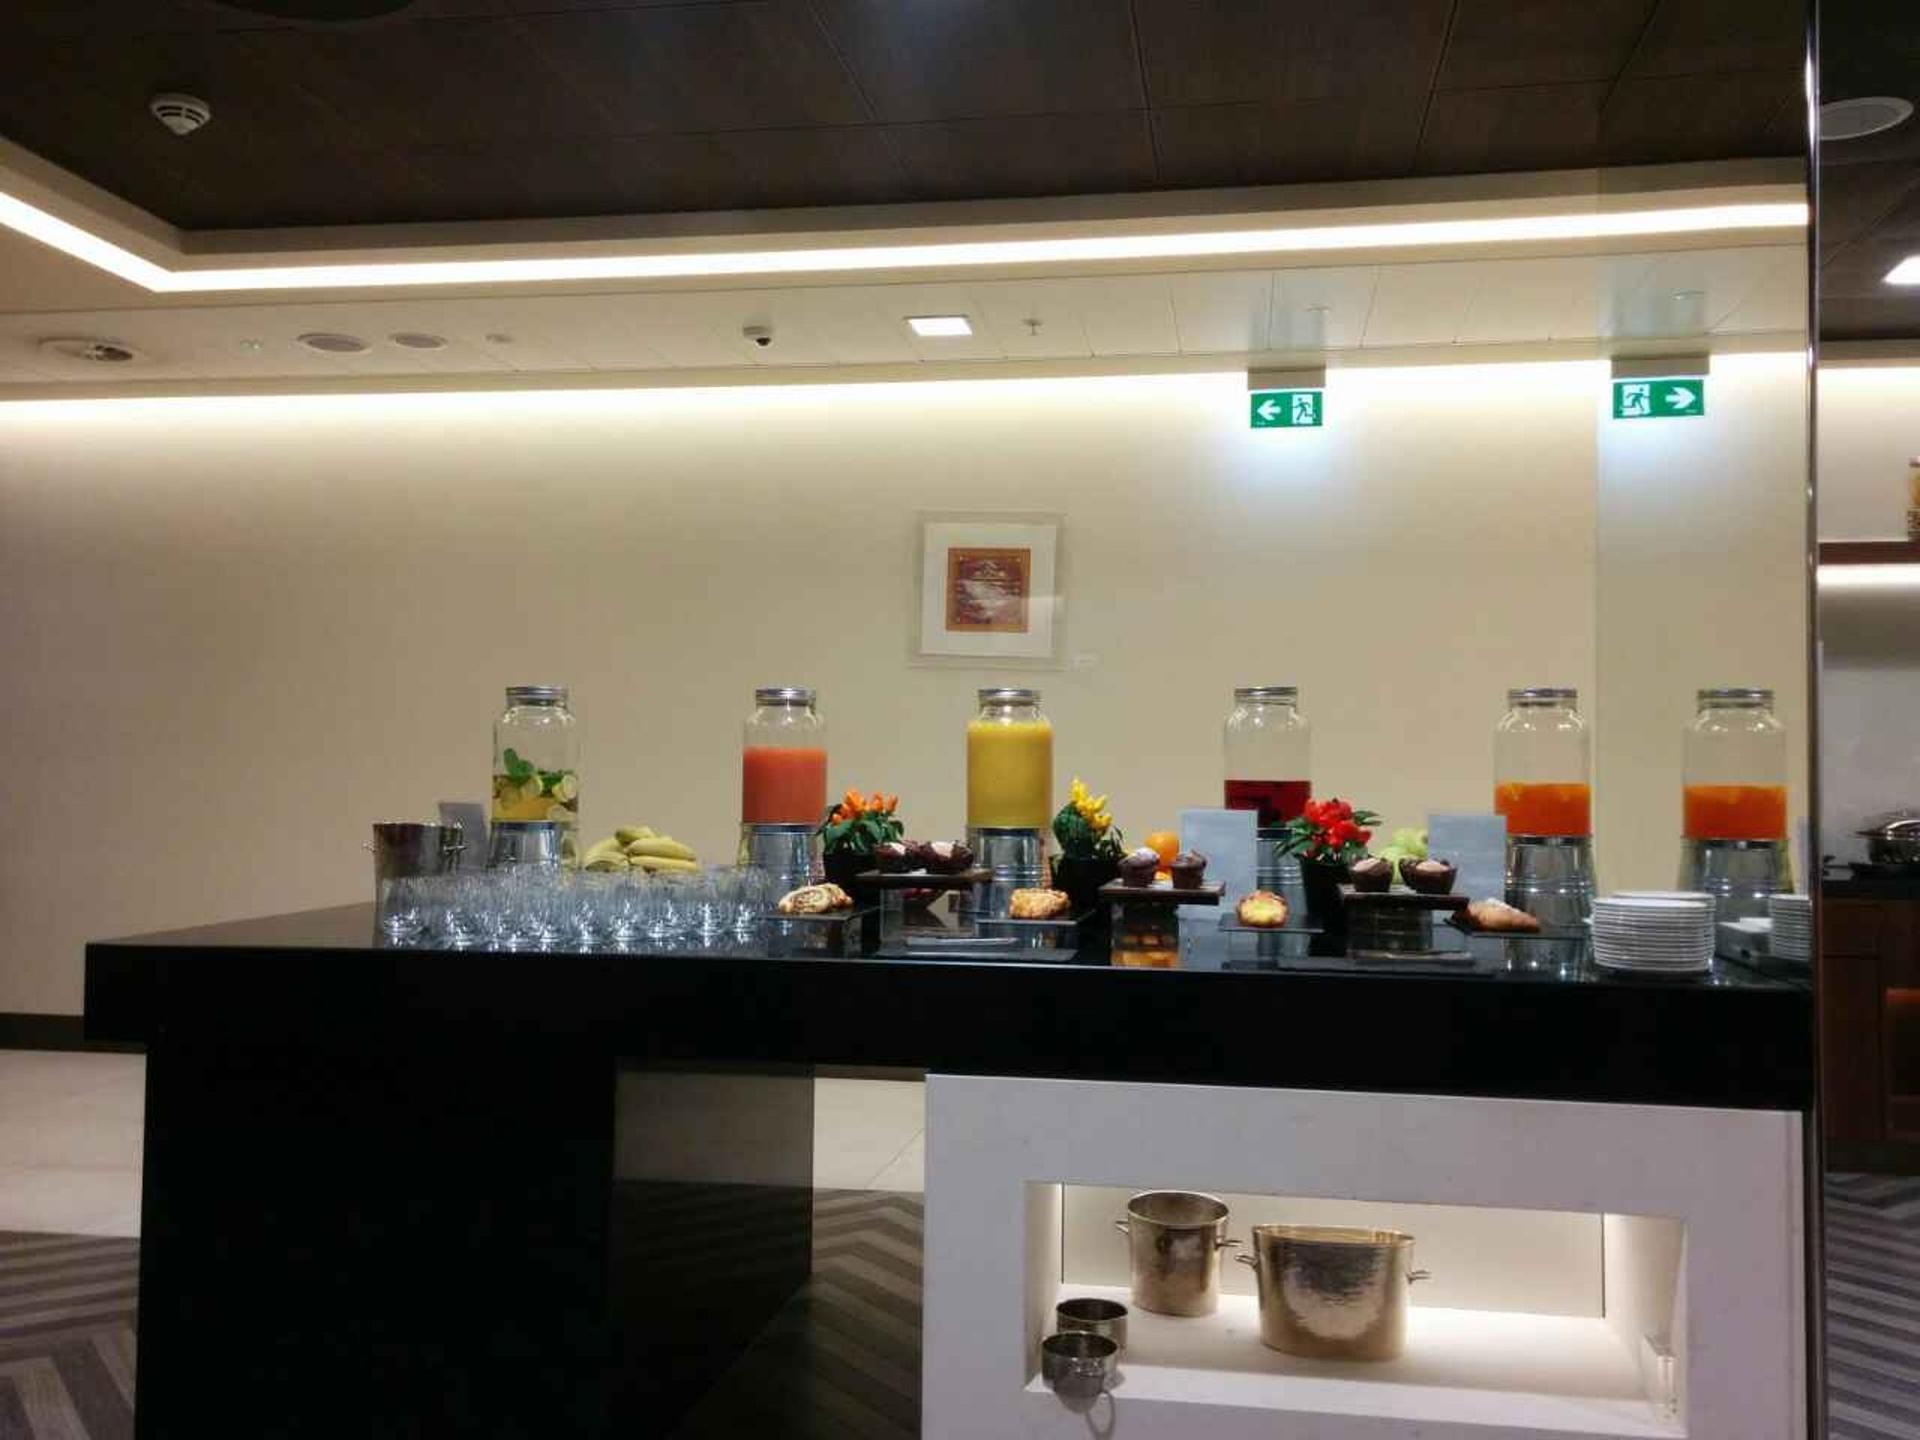 Singapore Airlines SilverKris Lounge image 7 of 36